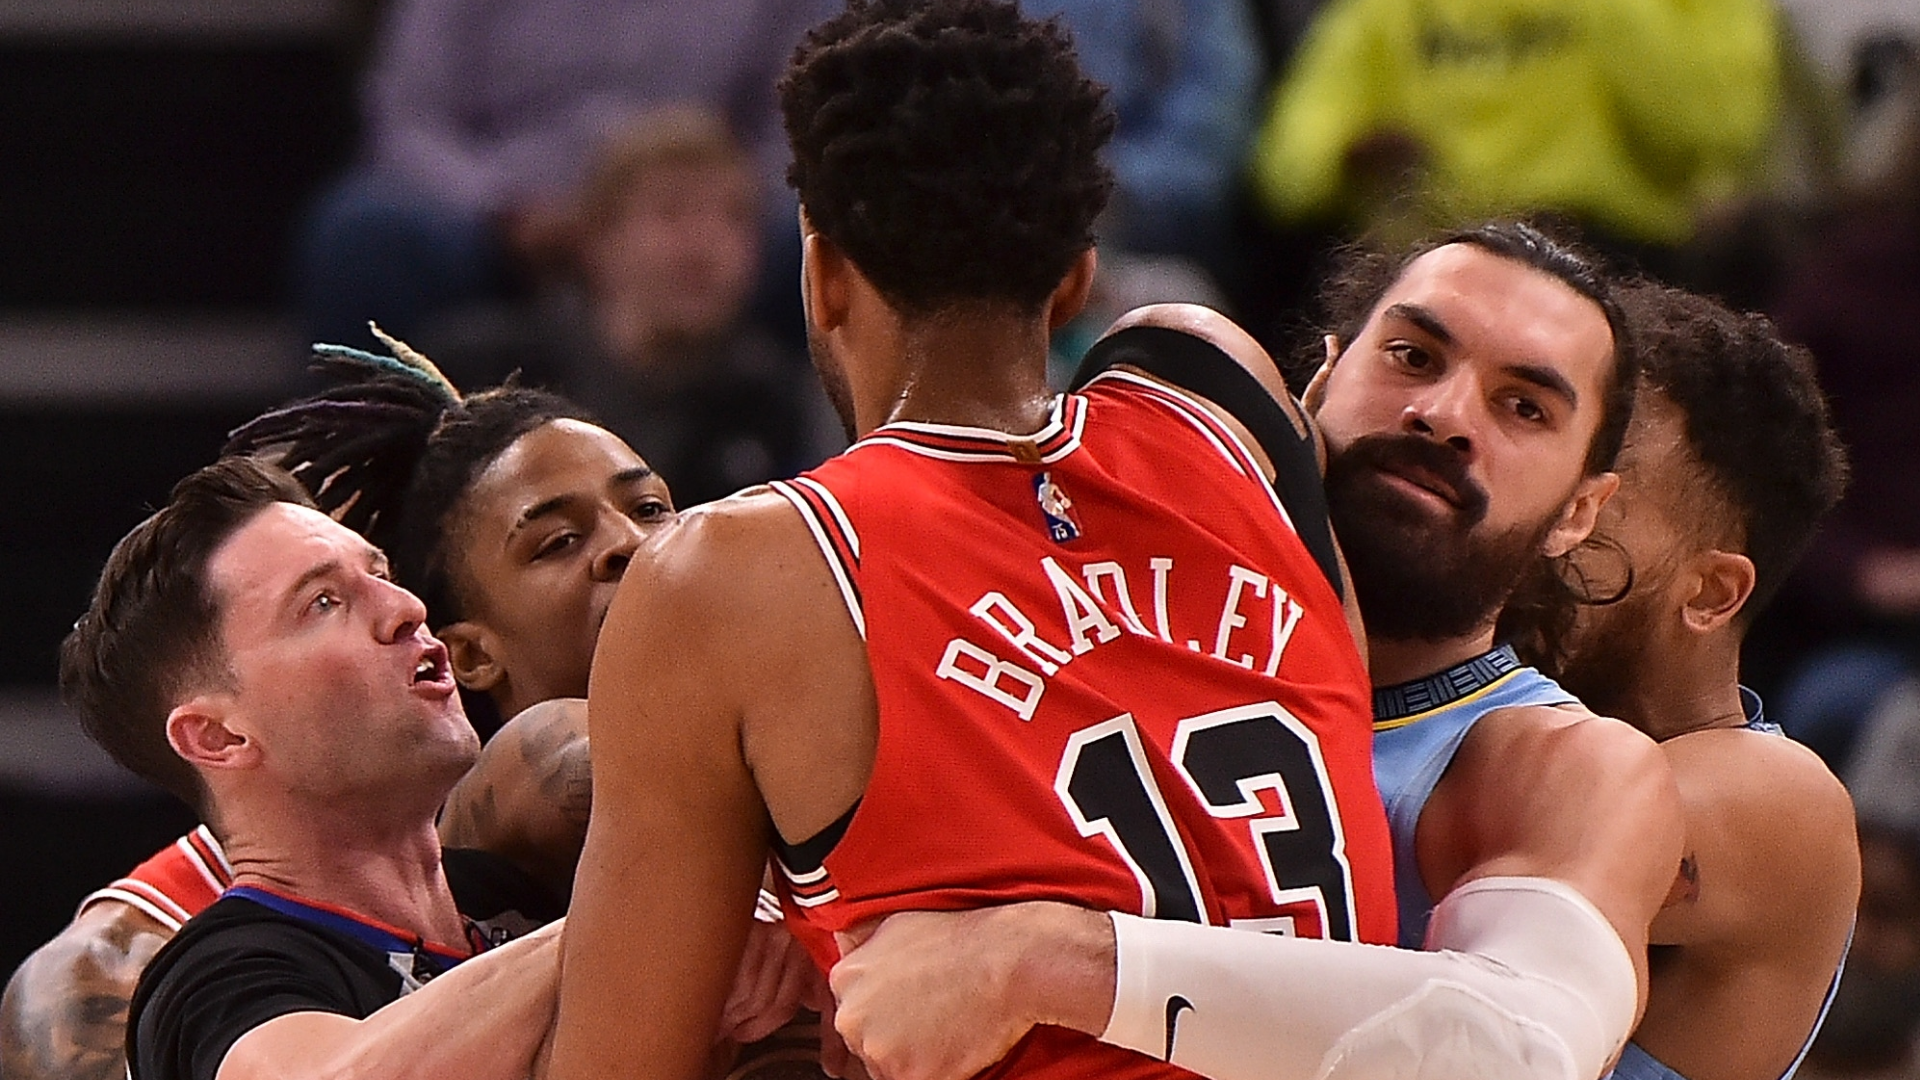 Grizzlies' Steven Adams carried Tony Bradley away from an altercation with hilarious ease